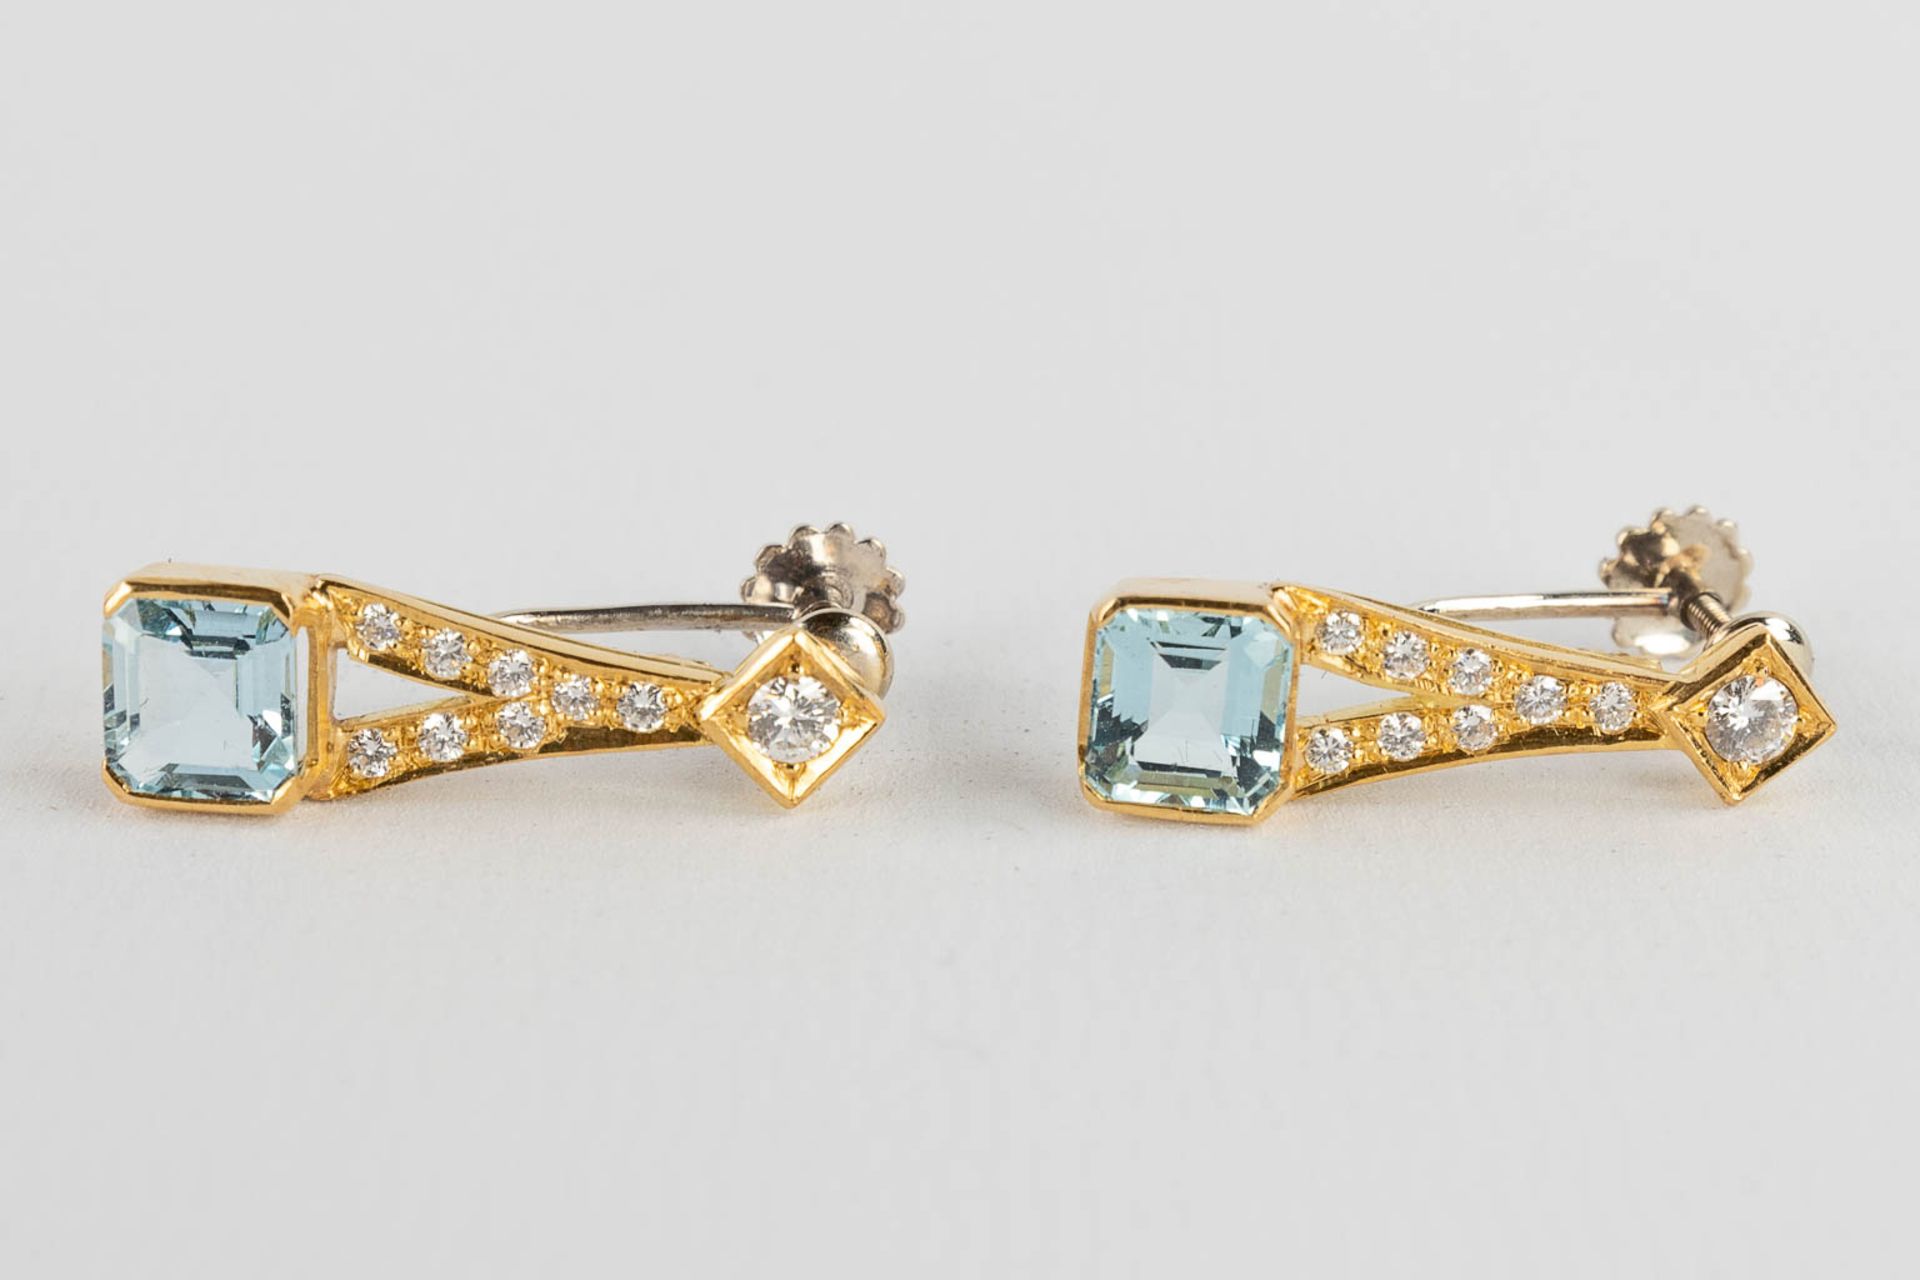 A necklace with two earrings, 18kt yellow gold Brilliants and Topaz/Aquamarine, 26,77g. - Image 15 of 15